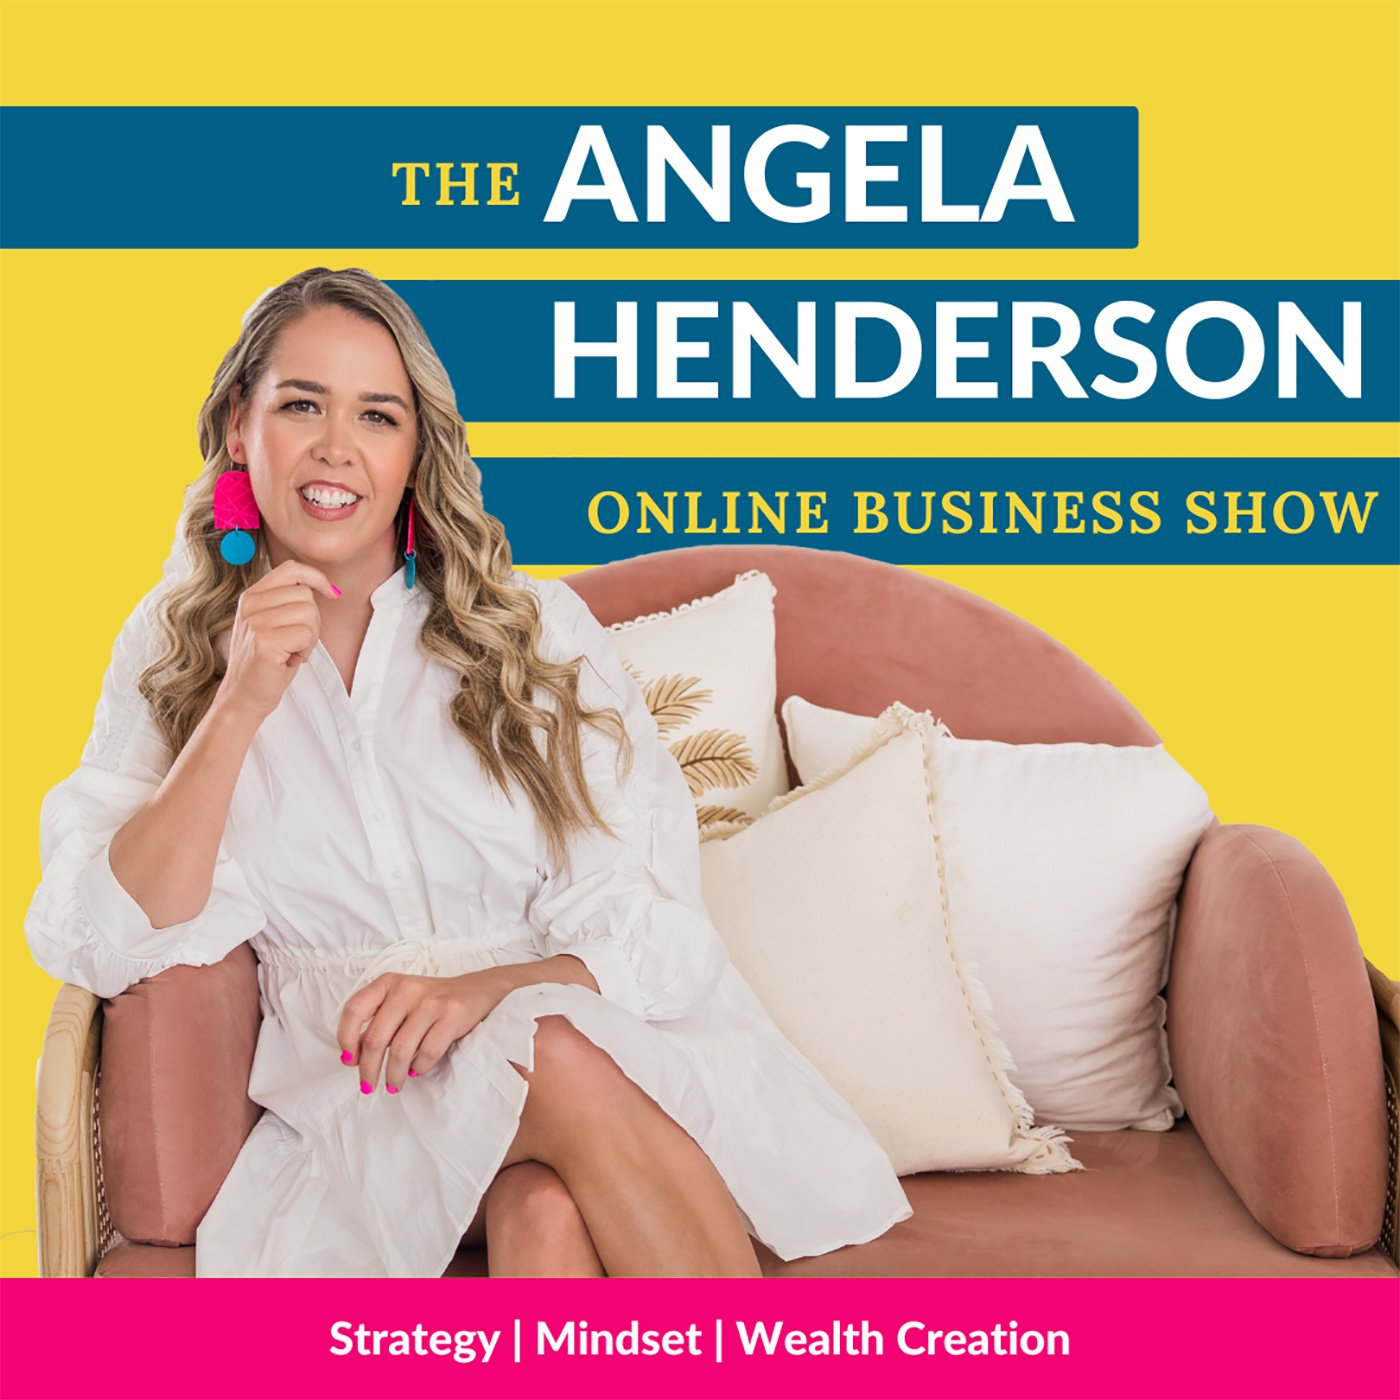 How One Key Metric Can Supercharge Your Business with Angela Henderson